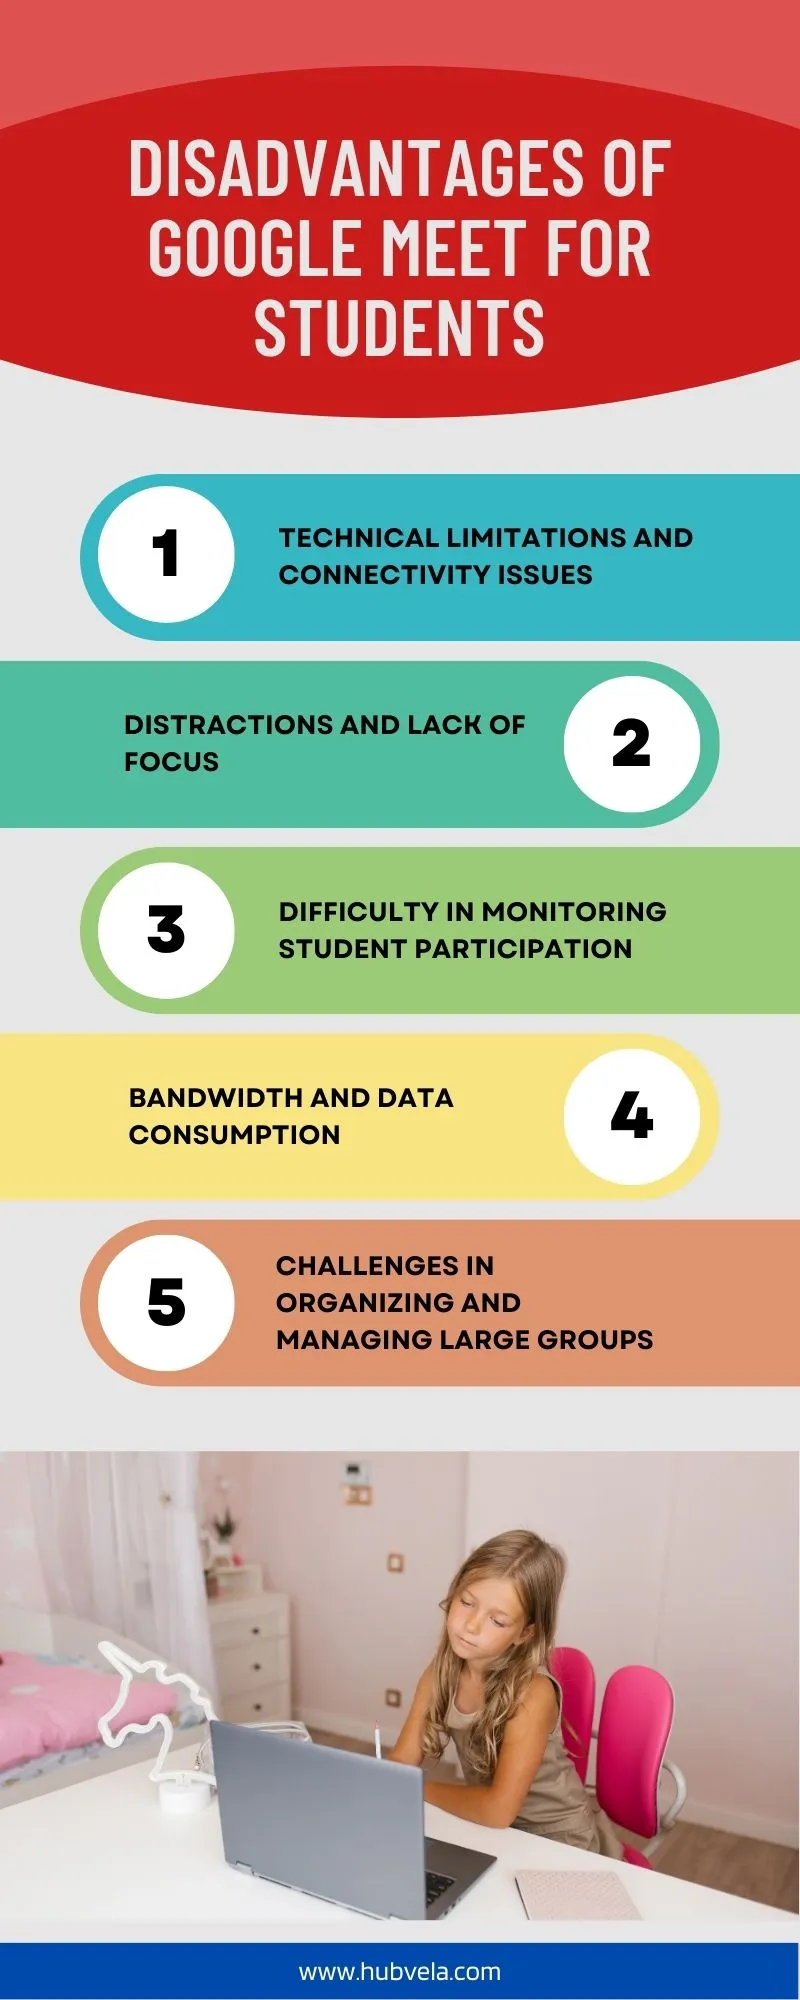 Disadvantages of Google Meet for Students Infographic